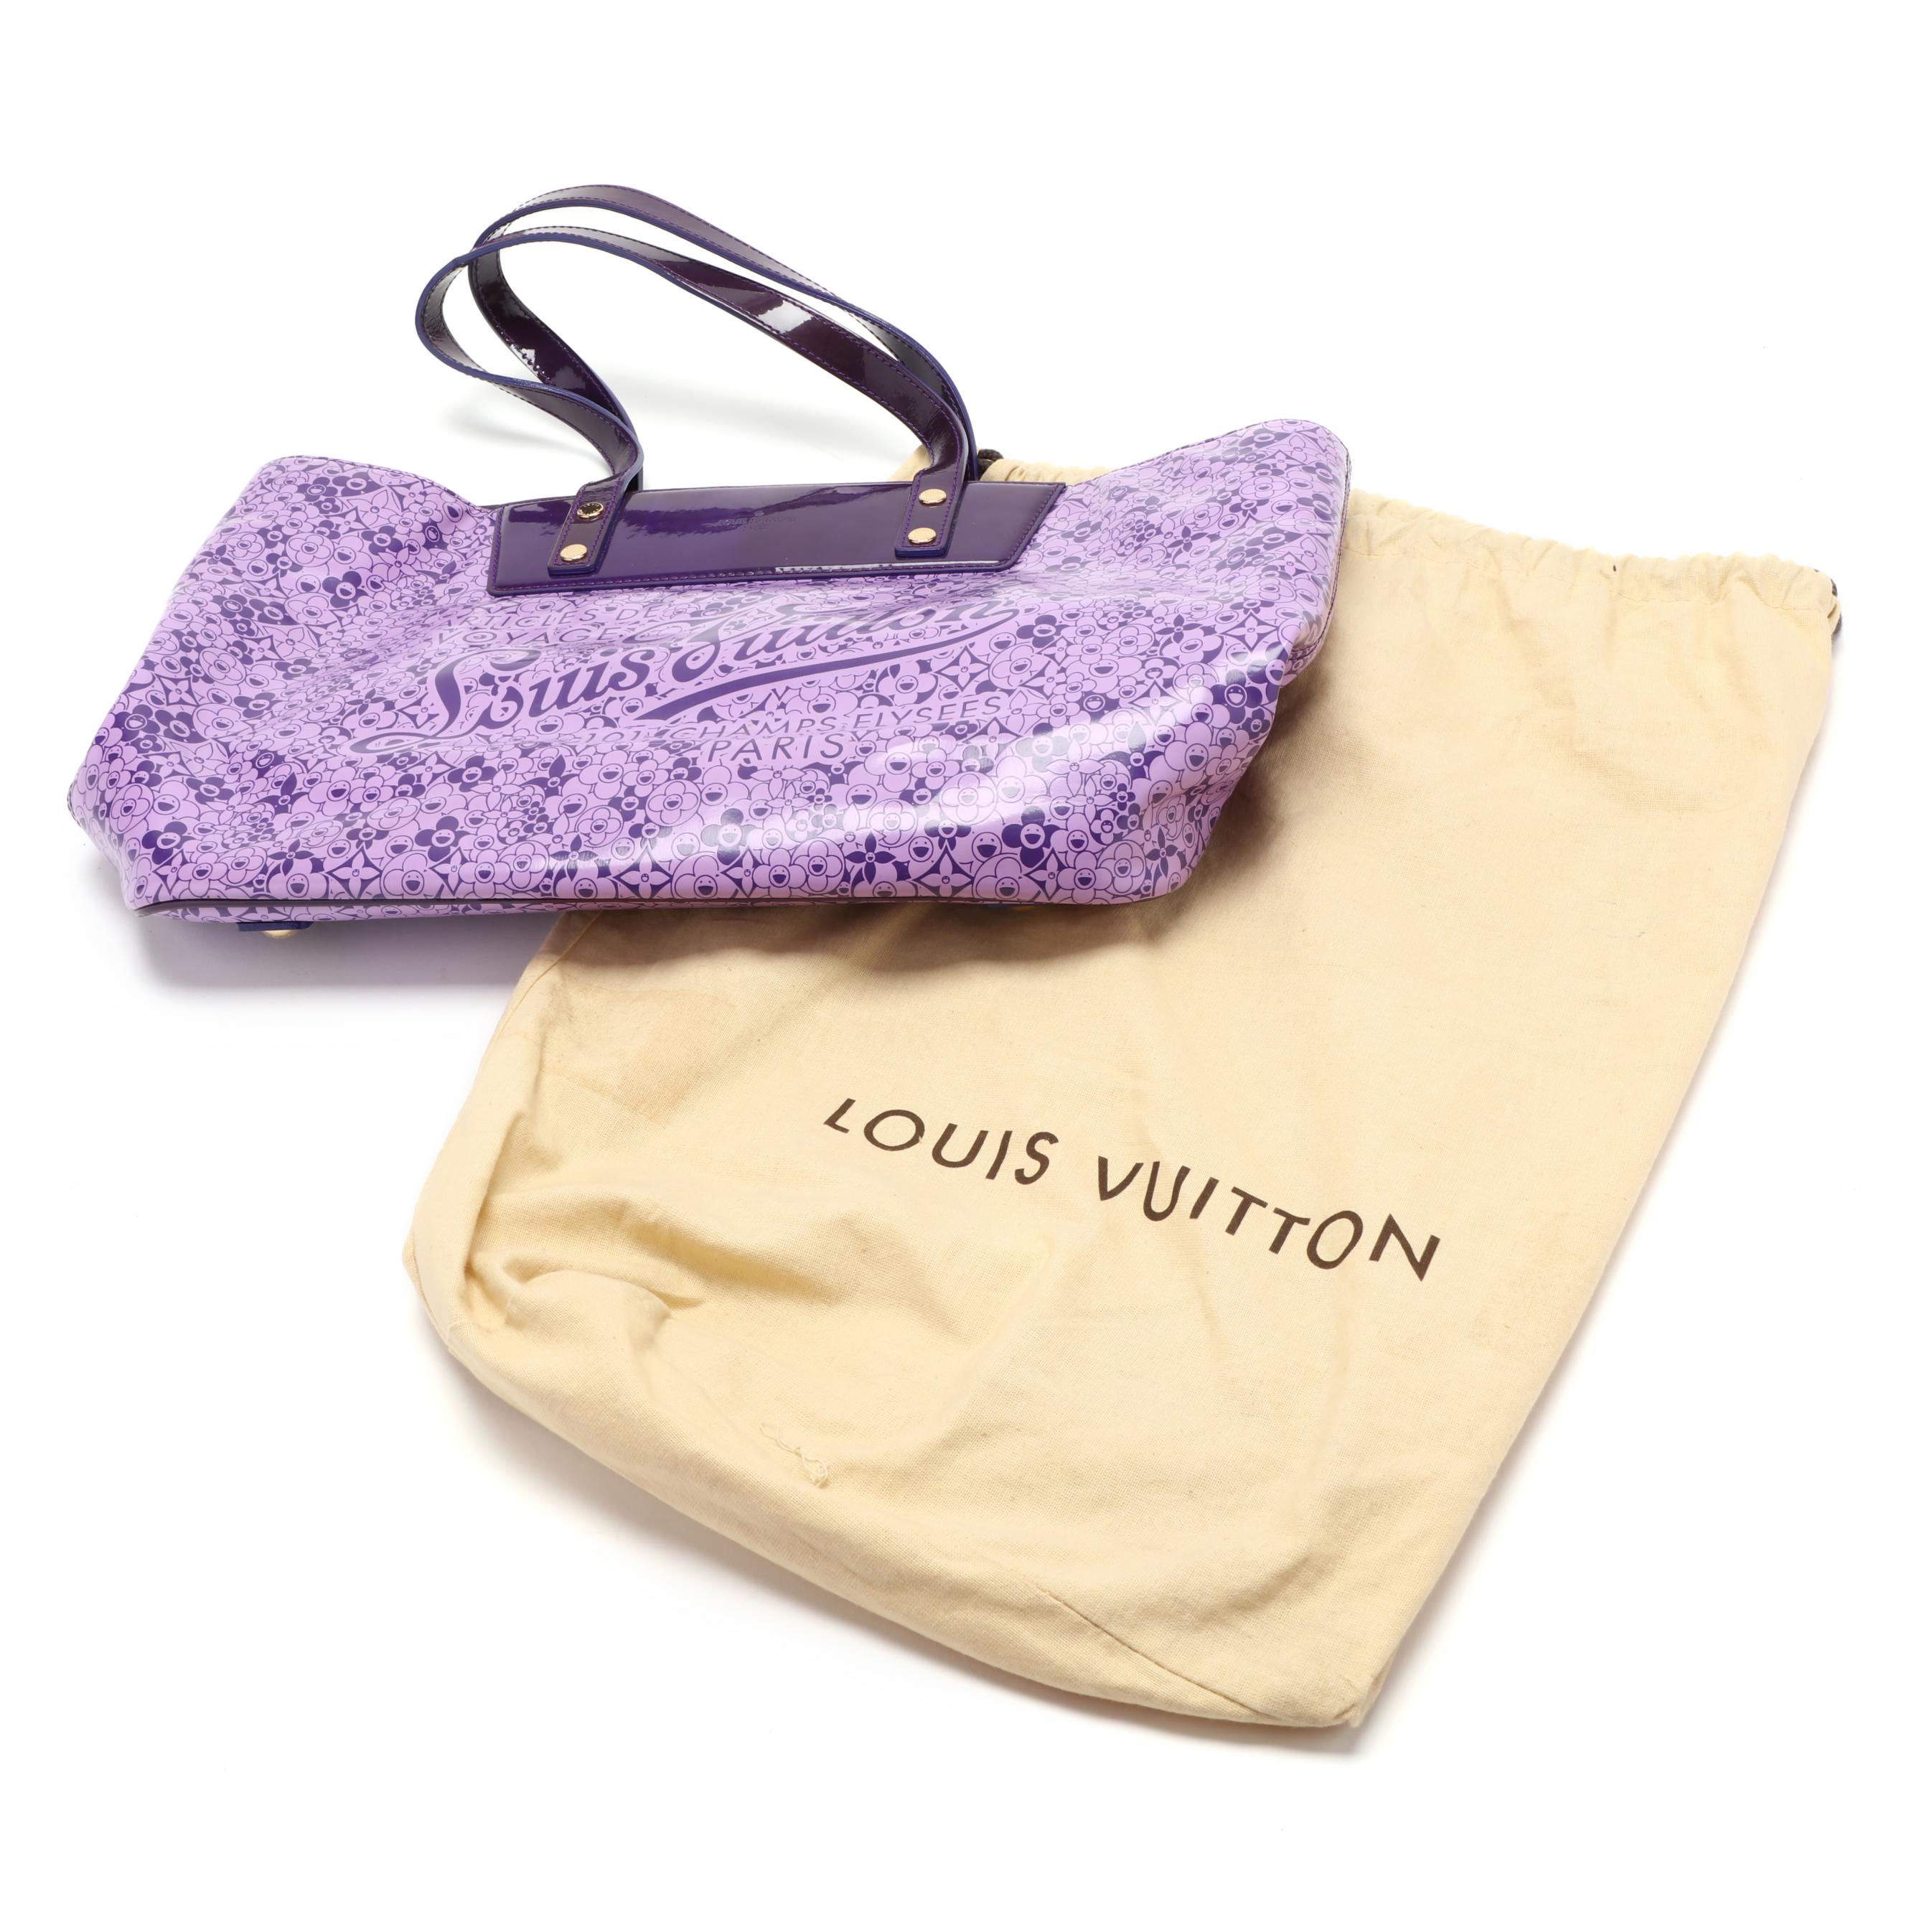 Vintage Louis Vuitton Cosmic Blossom GM Voyage Tote FO1100 072623